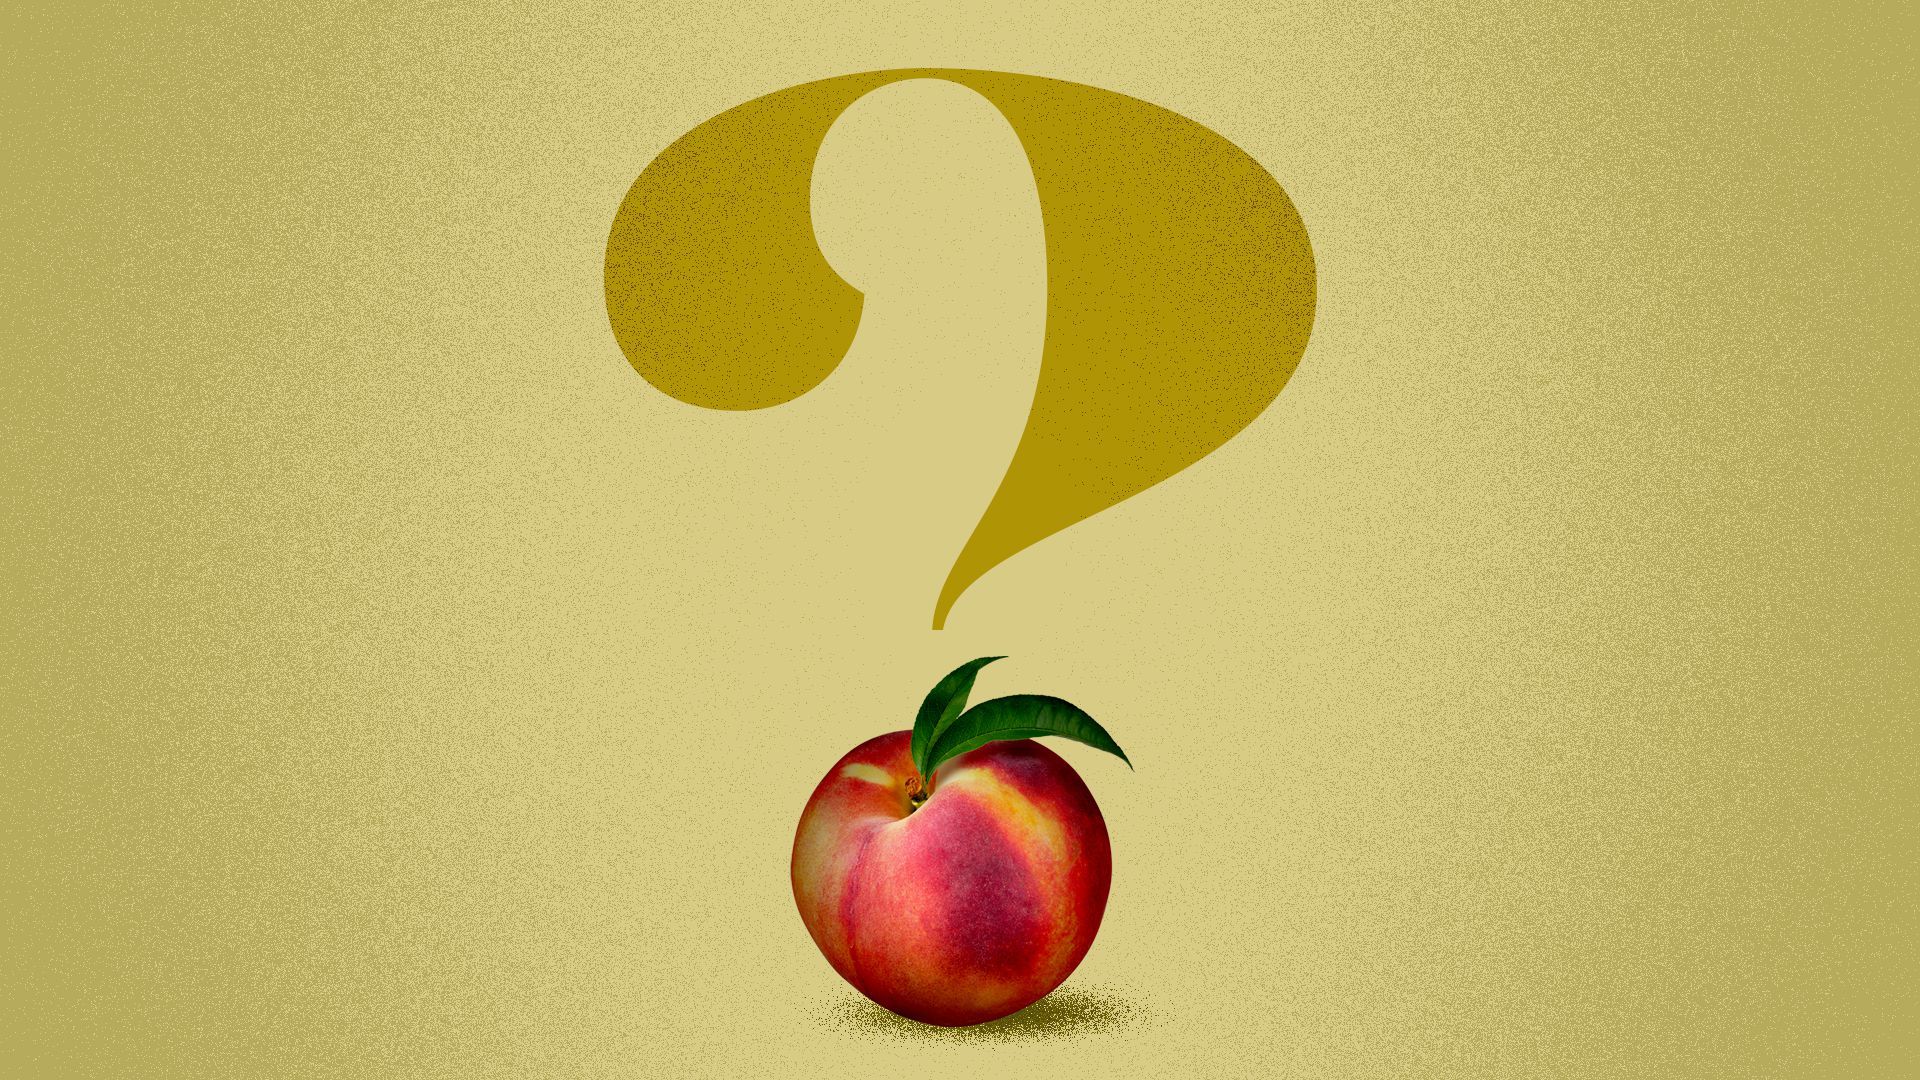 Illustration of a peach as the dot in a question mark. 